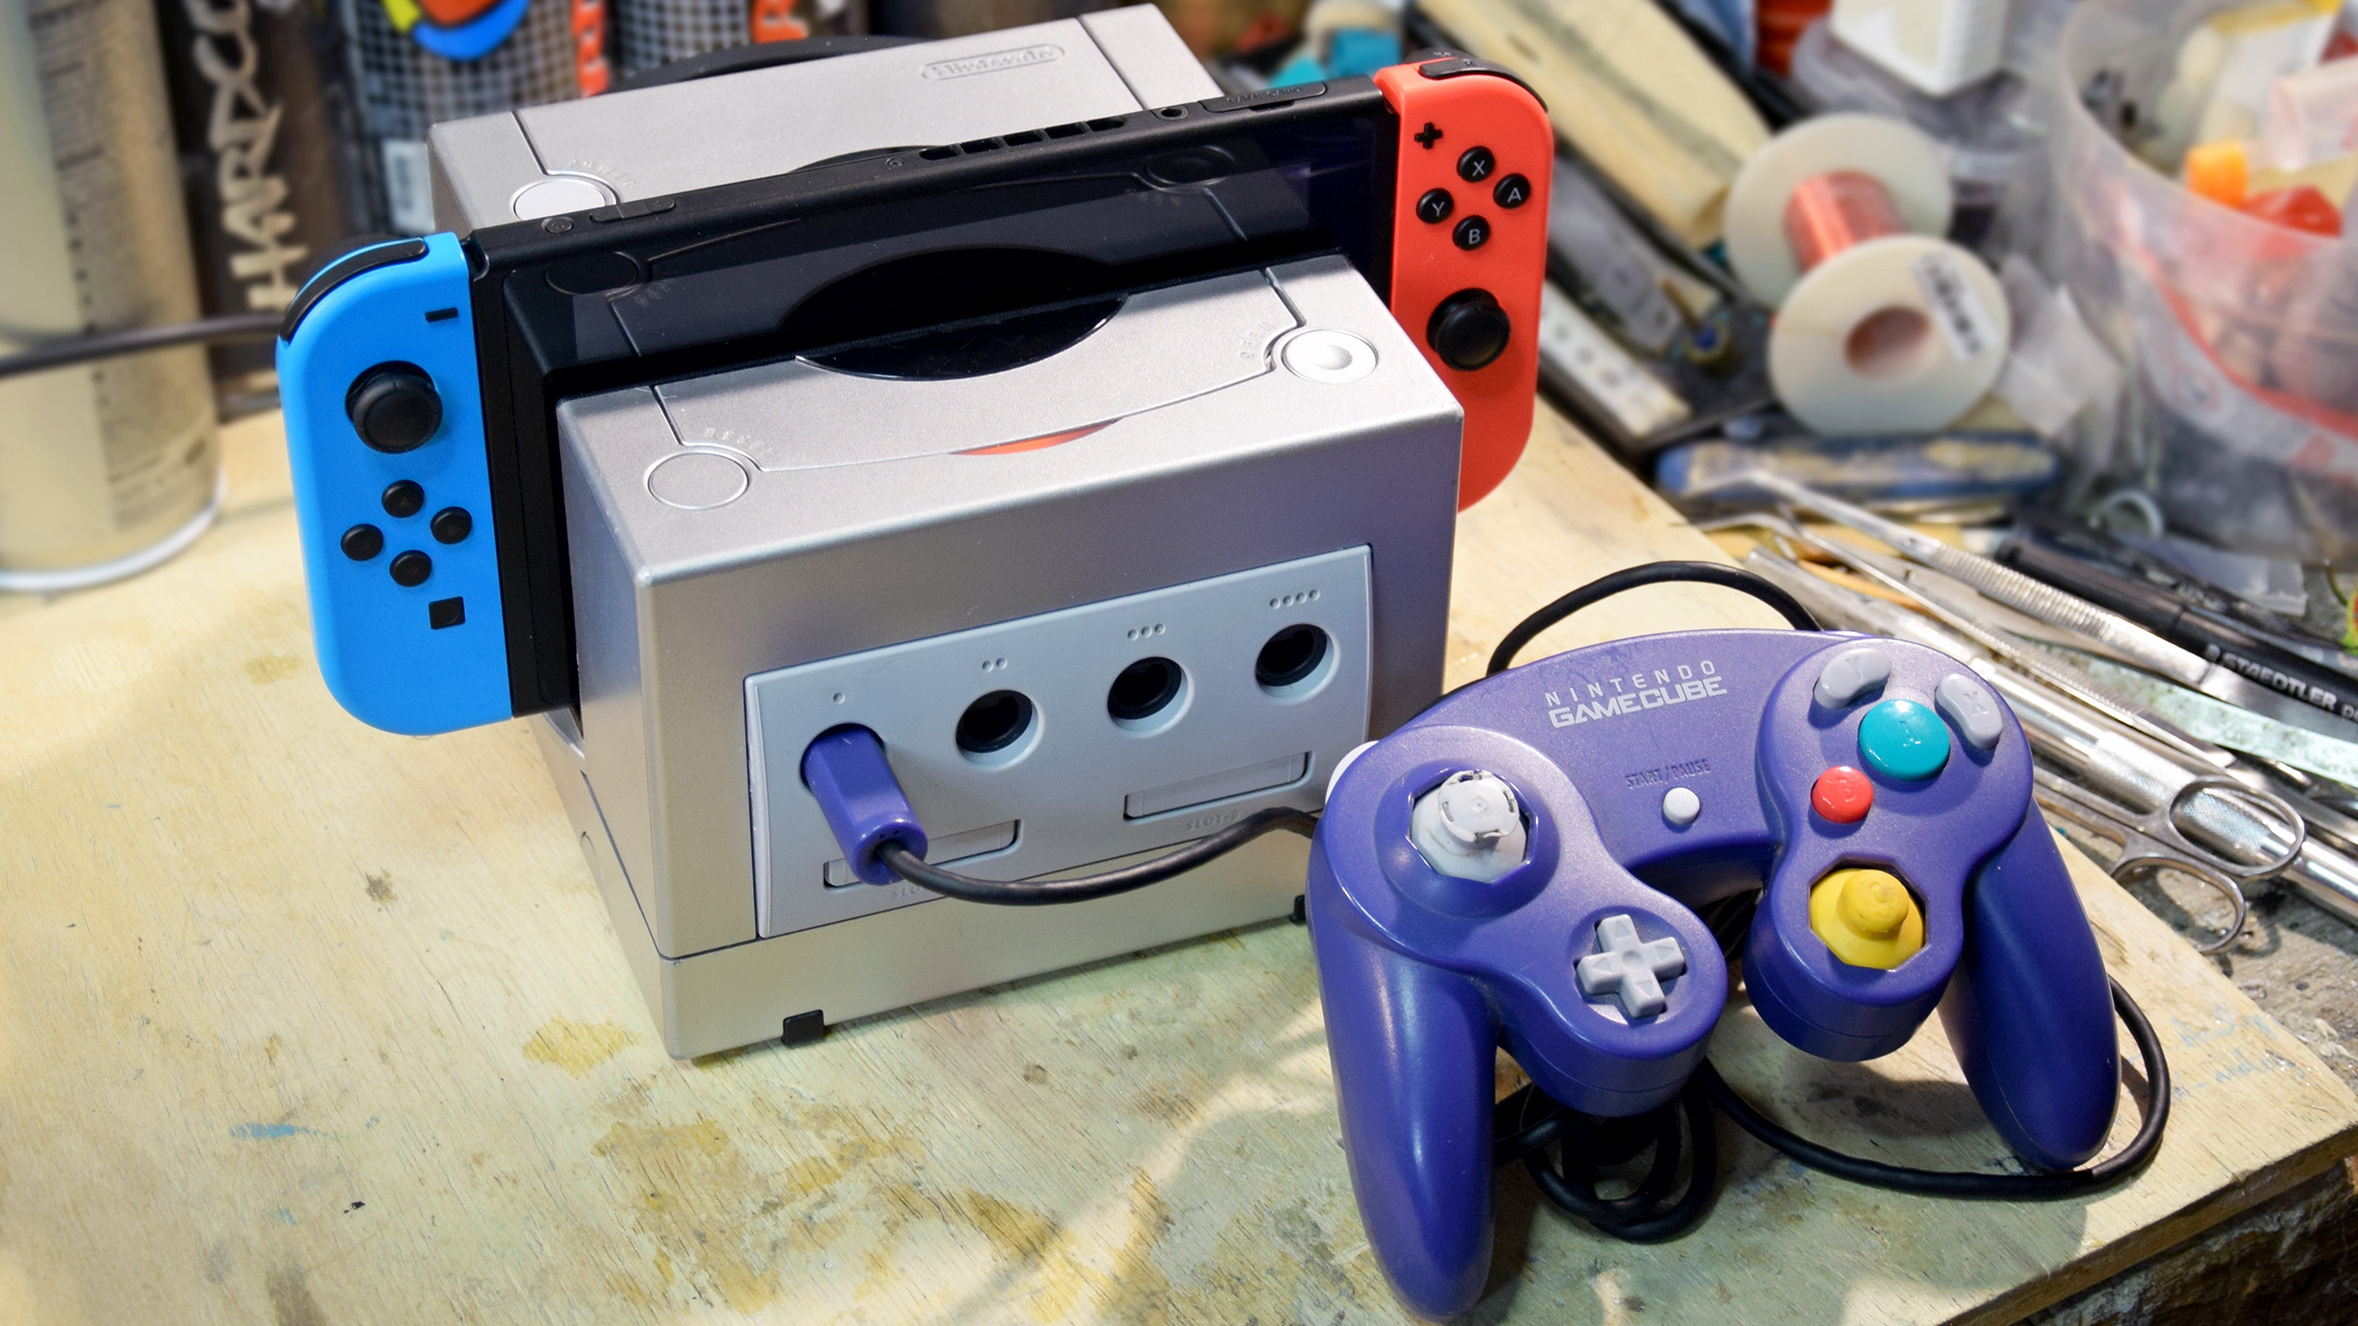 Gamecube Dock For Switch Mods Nintendo With More Nintendo | Hackaday